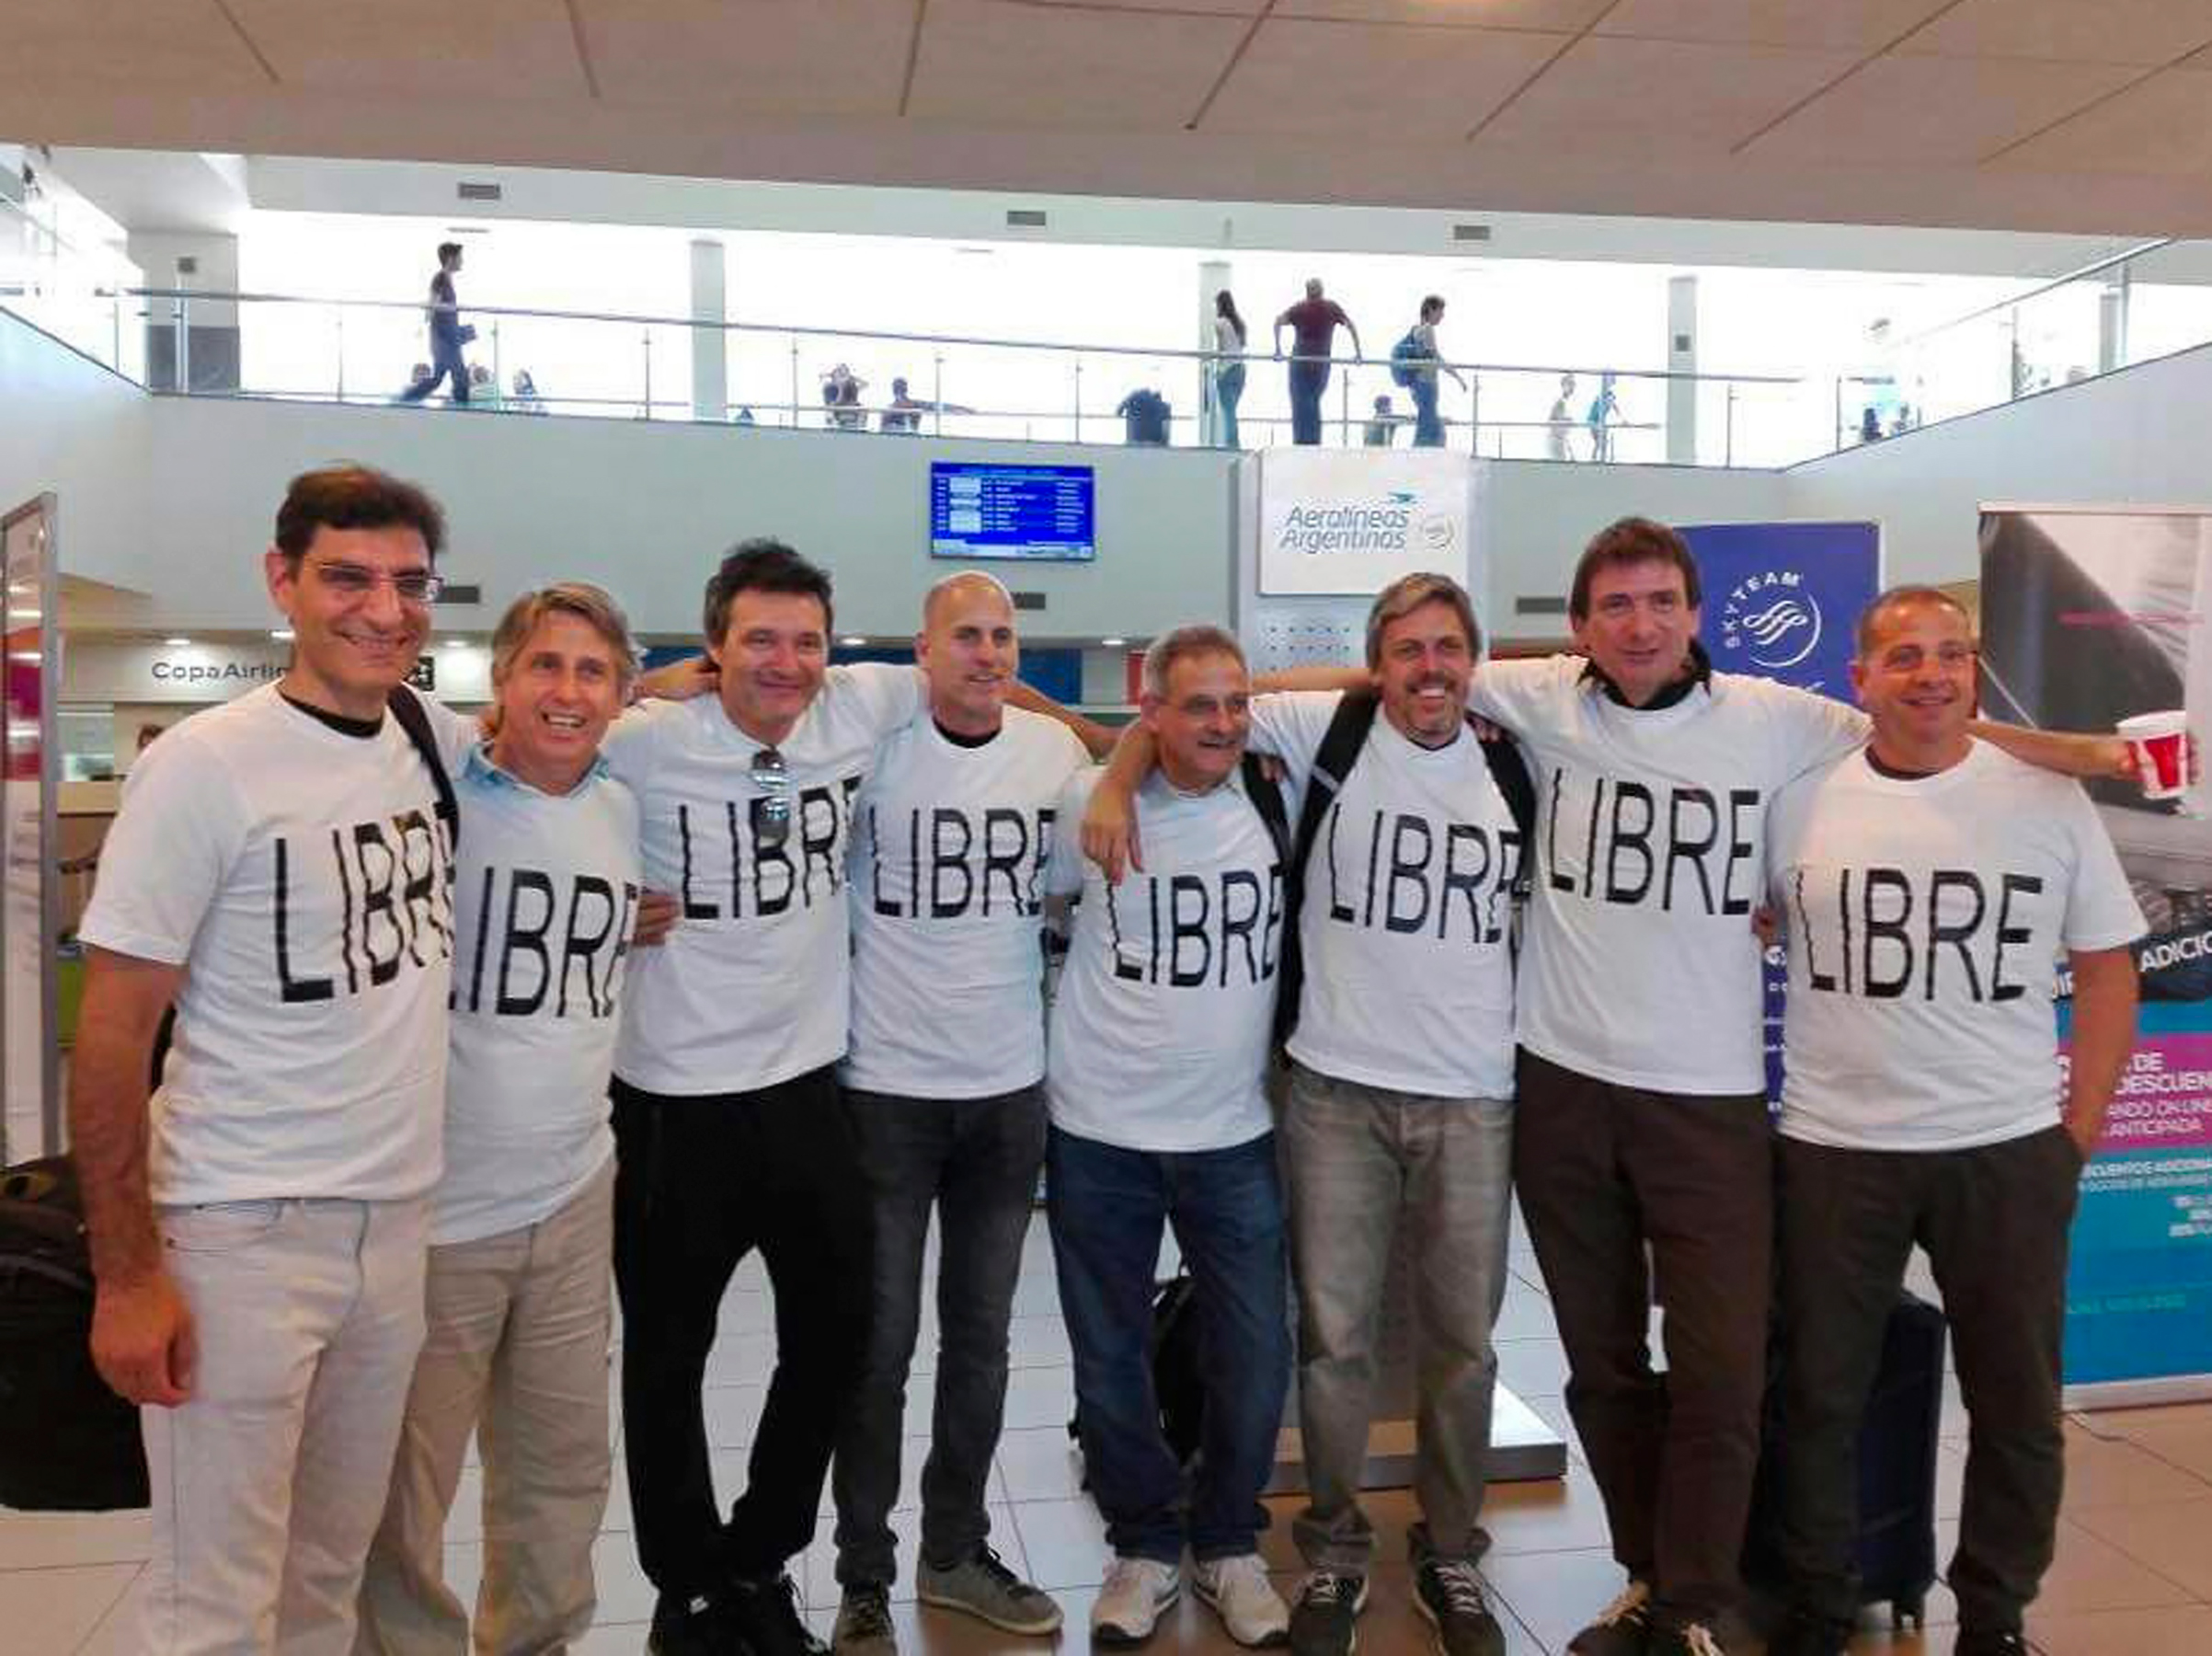 (From left) Hernan Ferruchi, Alejandro Pagnucco, Ariel Erlij, Ivan Brajckovic, Juan Pablo Trevisan, Hernan Mendoza, Diego Angelini and Ariel Benvenuto, gather for a group photo before their trip to New York City, at the airport in Rosario, Argentina, Oct. 28, 2017. Mendoza, Angelini, Pagnucco, Erlij and Ferruchi were killed in the terrorist attack in New York on Oct. 31. (Courtesy Trevisan family—AP)